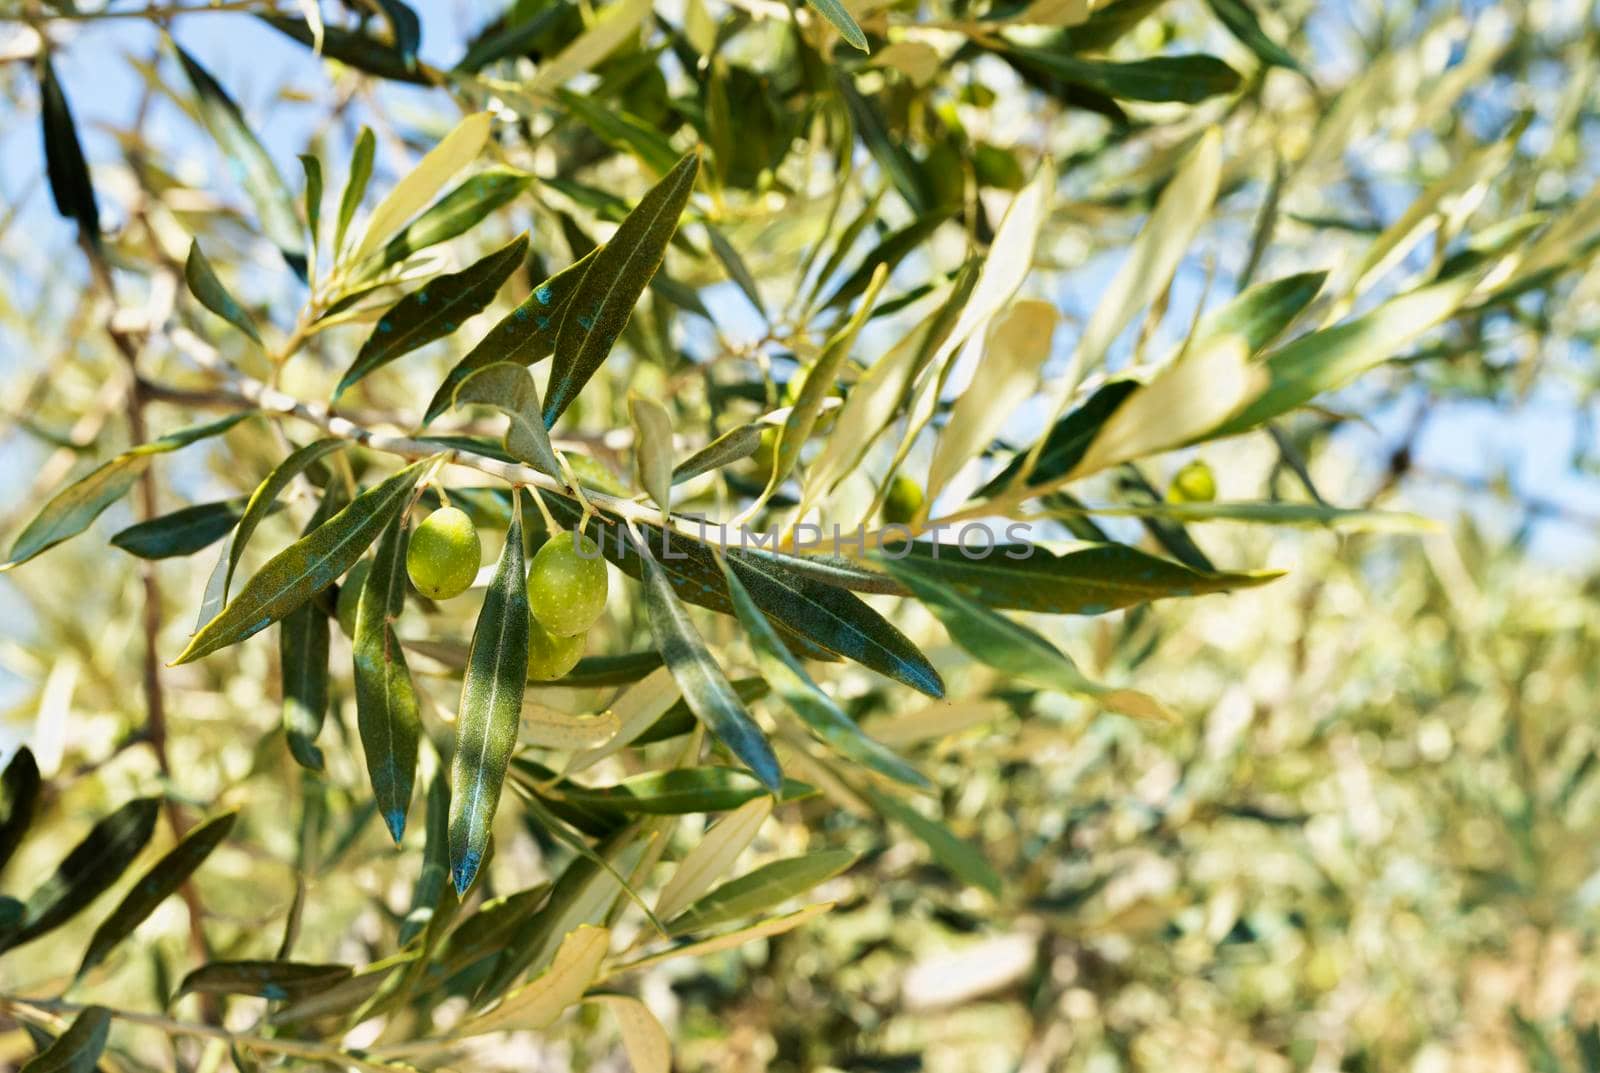 Several green olives on tree in a bright sunny day